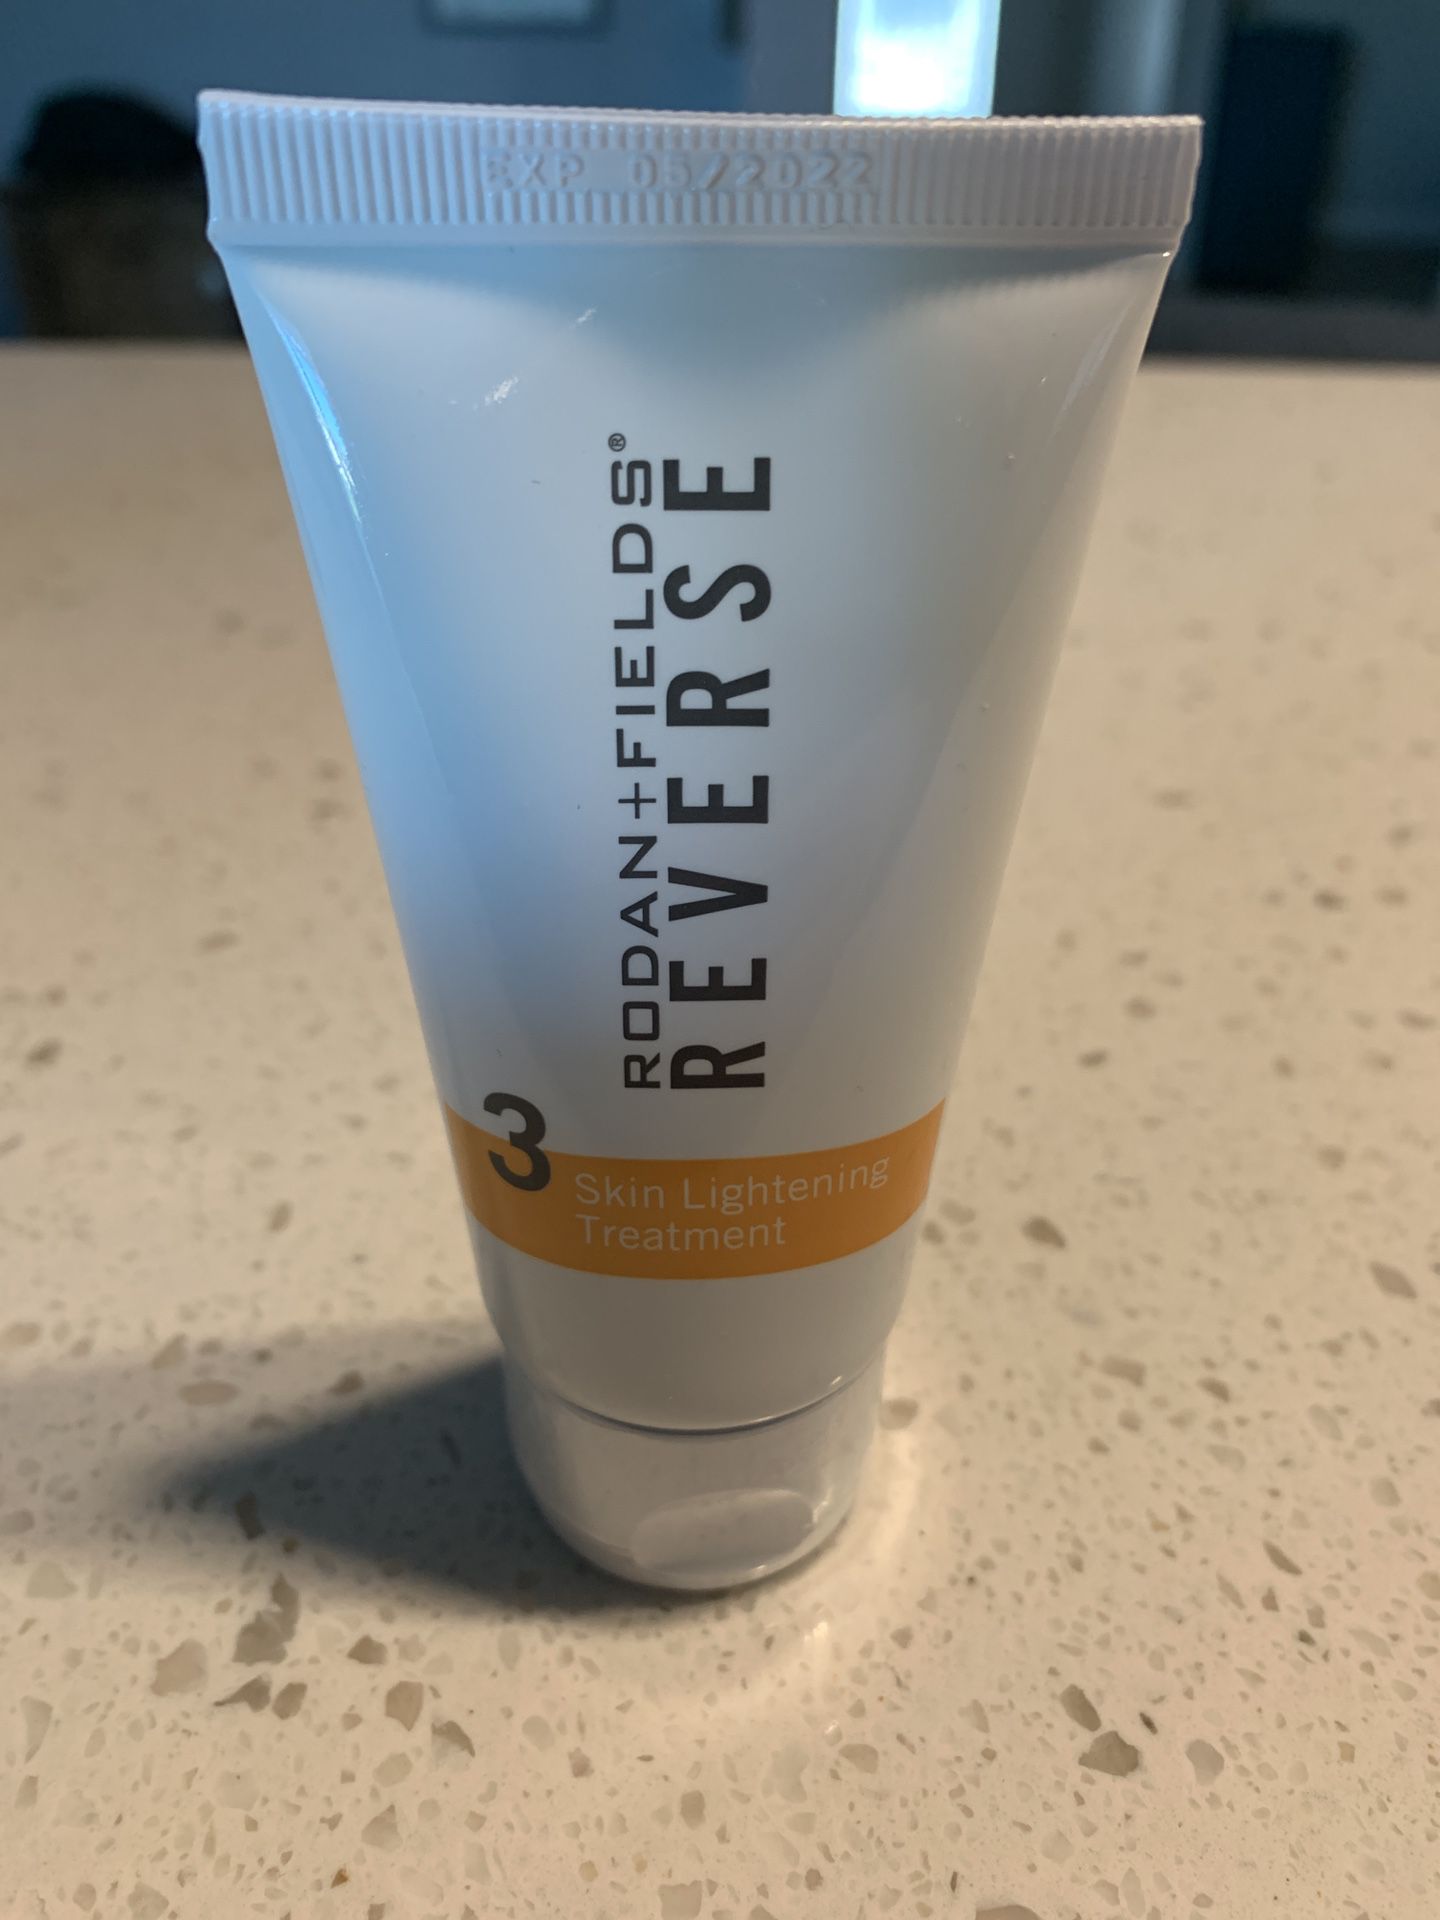 Rodan and Fields Reverse Skin Lightening Treatment - Discontinued - Expires 5/2022